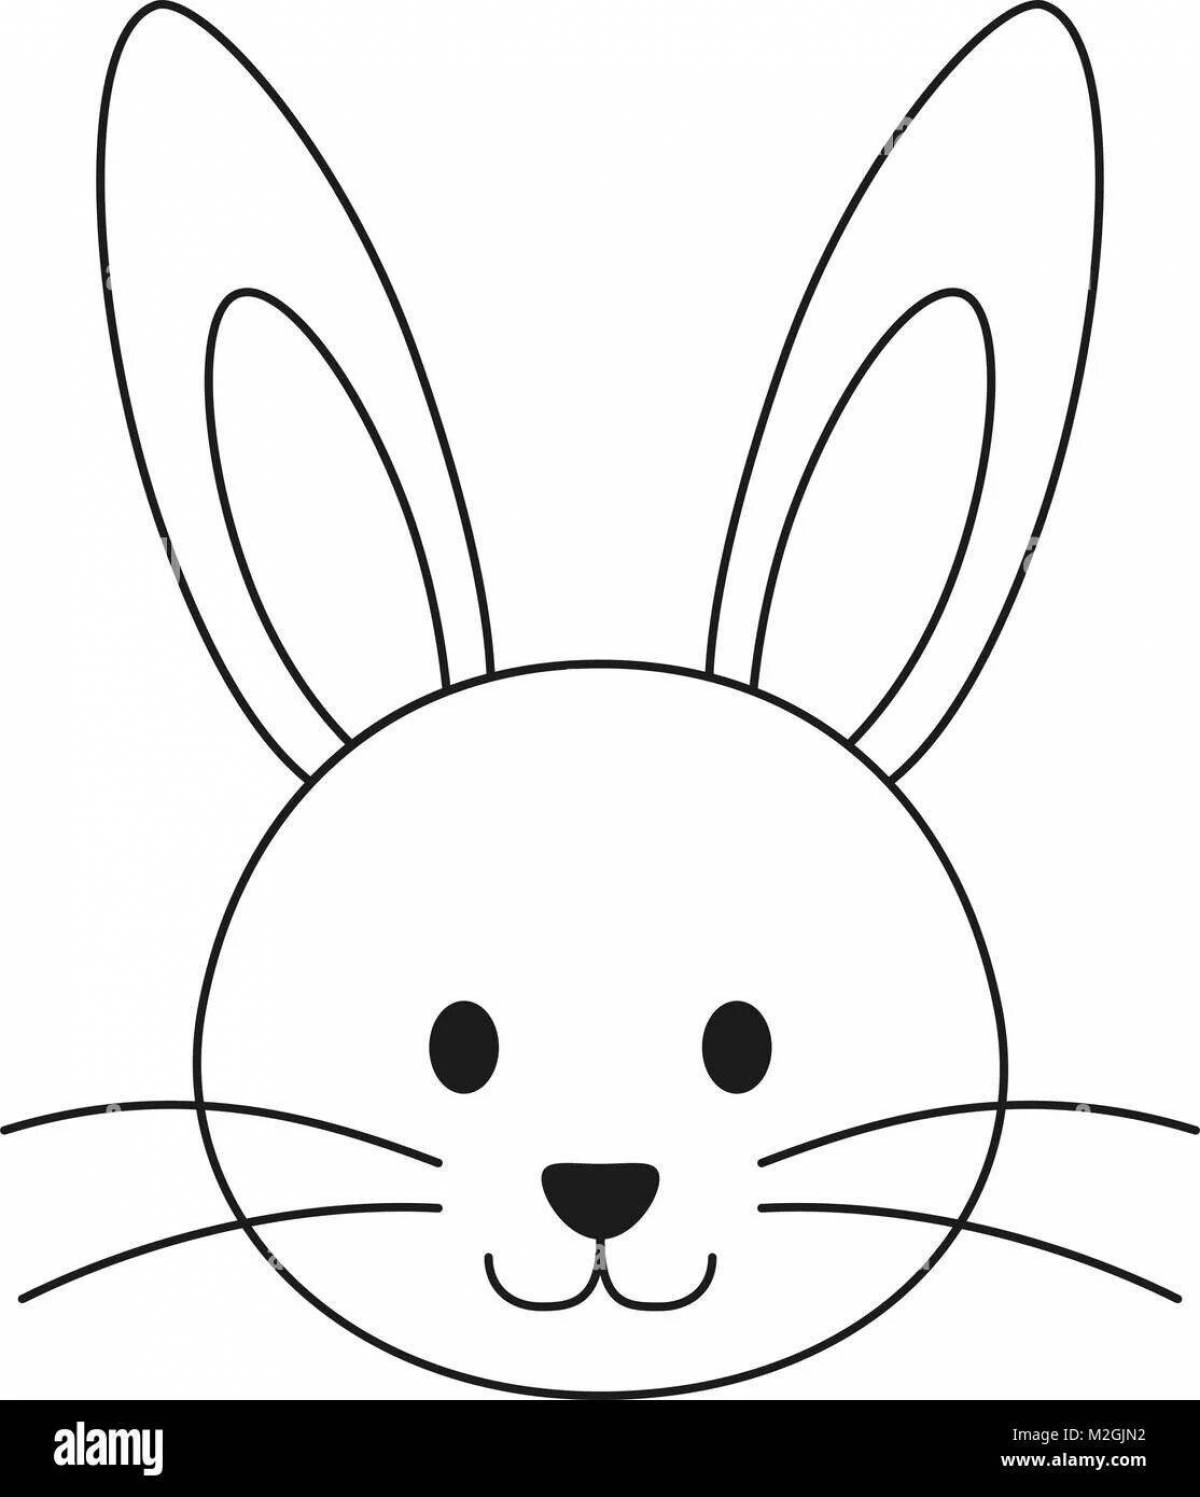 Coloring page of the face of a dazzling hare